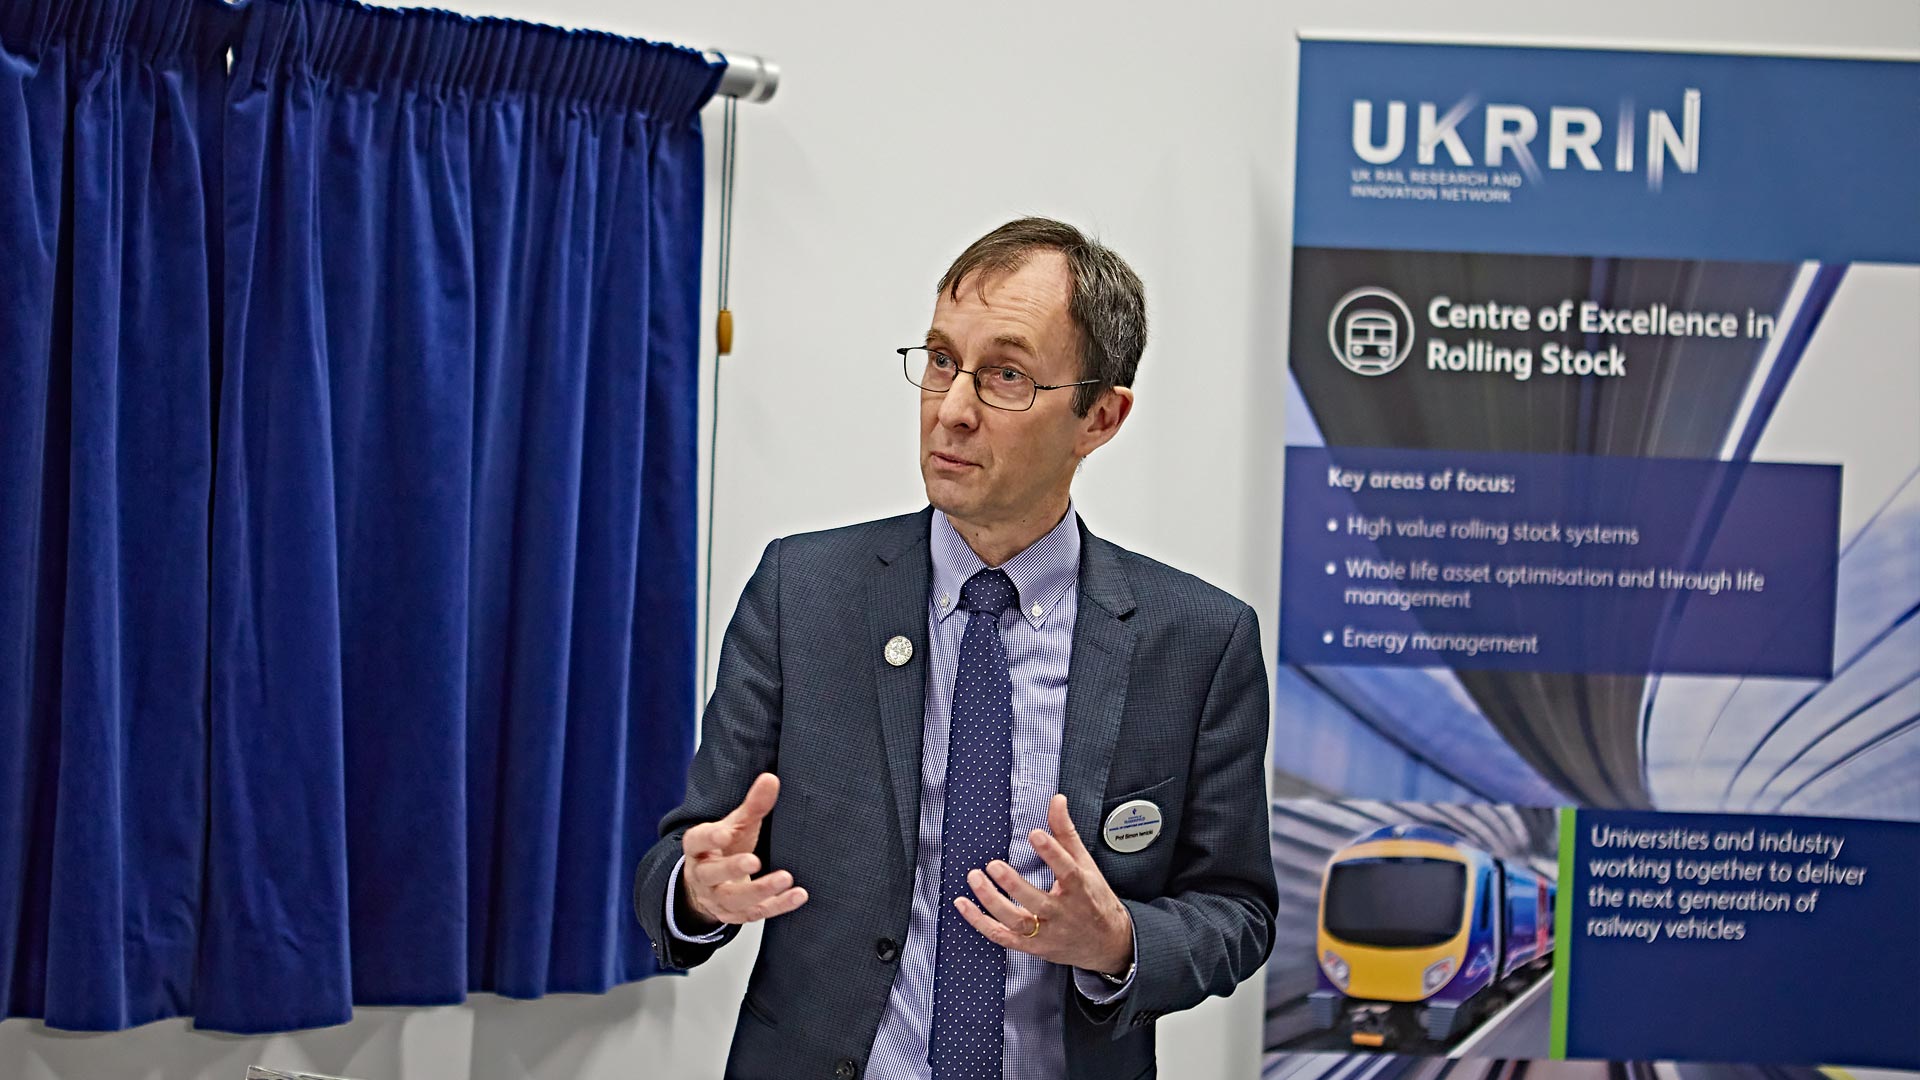 Professor Simon Iwnicki delivers his speech at the official opening of the new Centre of Excellence in Rolling Stock at the University of Huddersfield